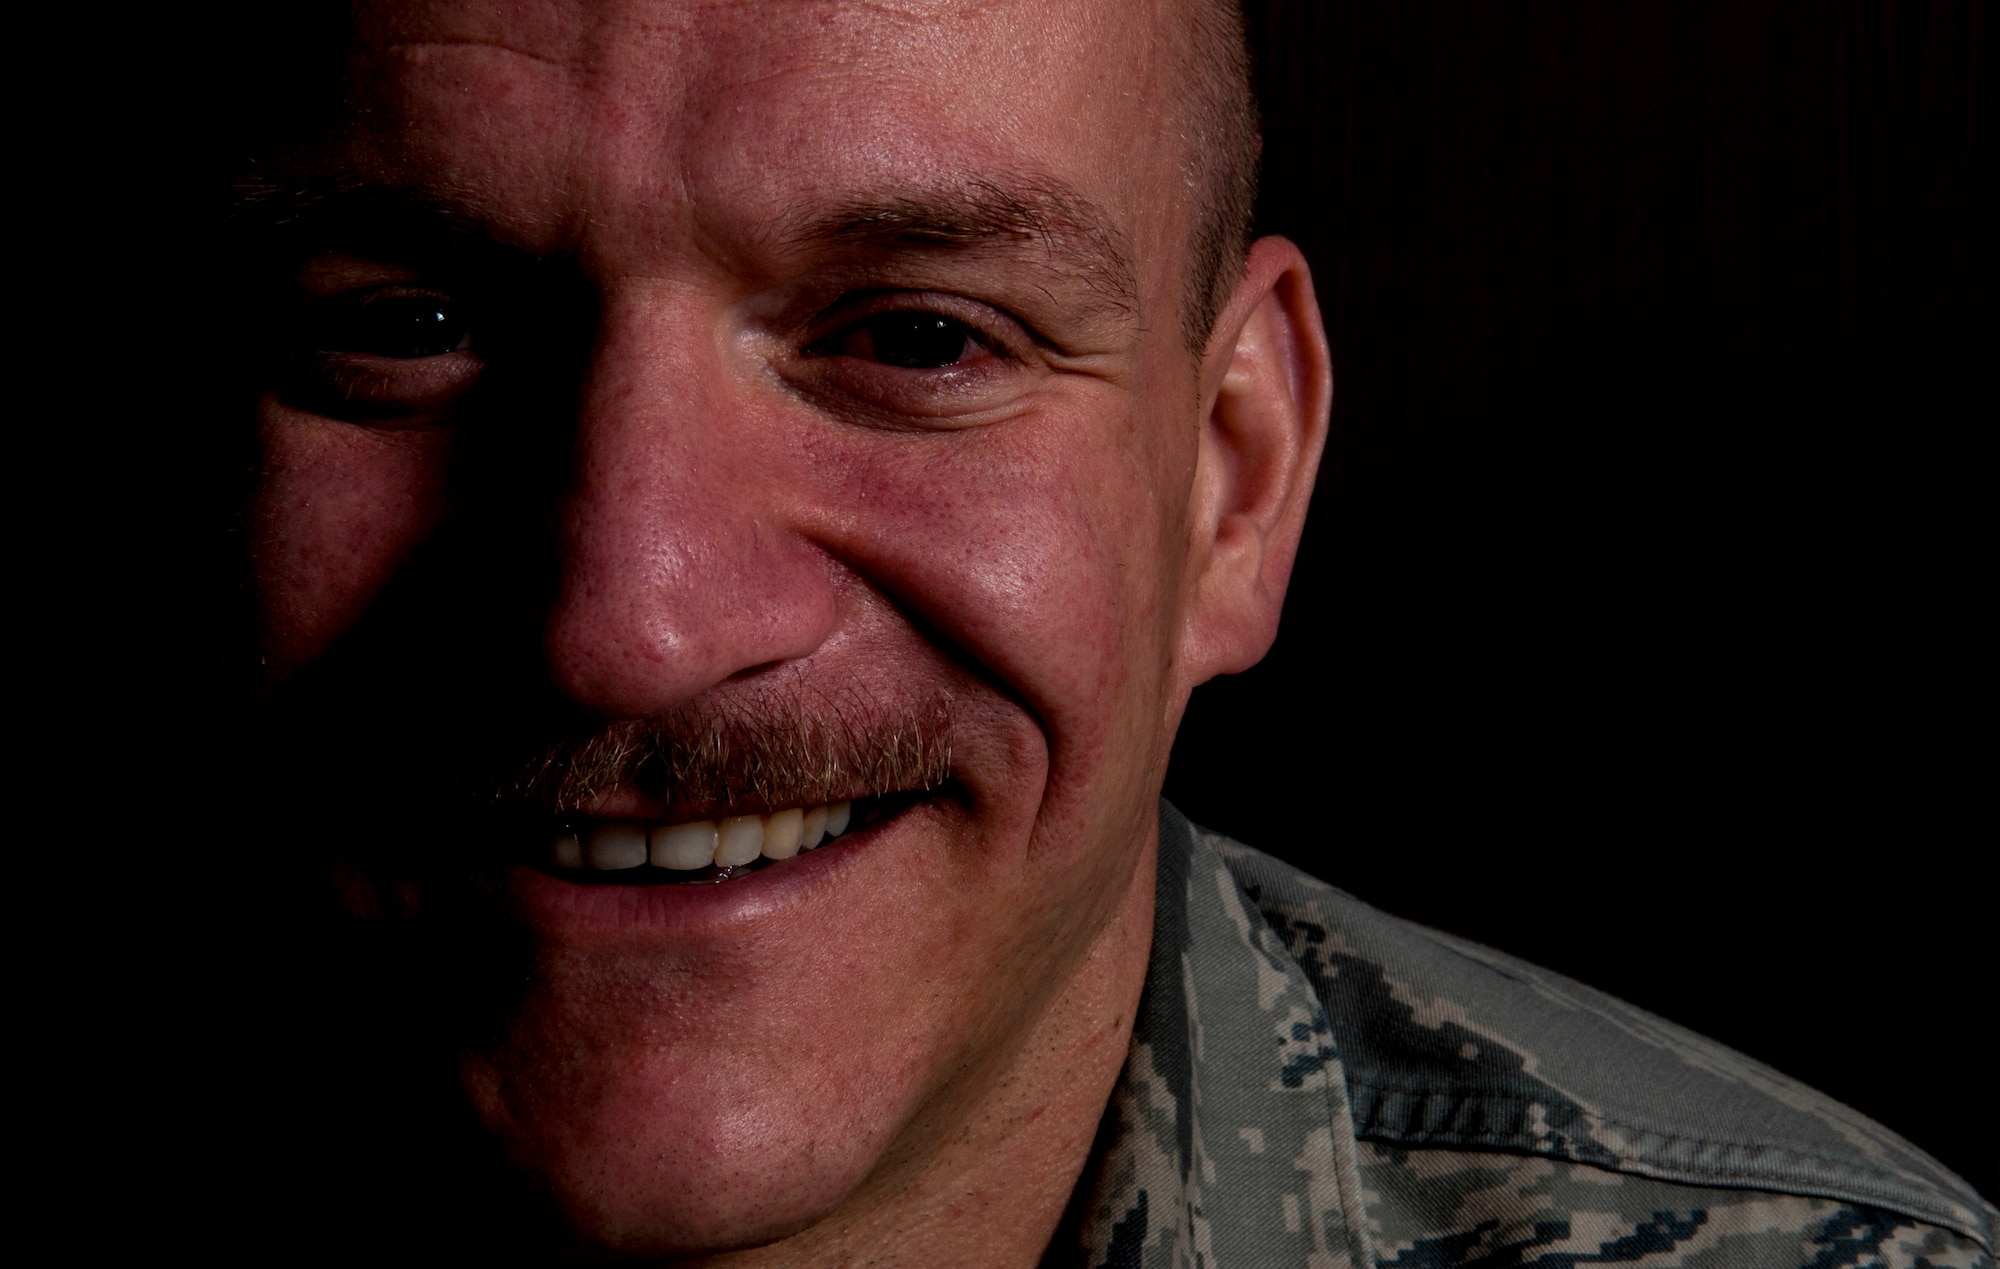 U.S. Air Force Master Sgt. Donald Stichter, 52nd Equipment Maintenance Squadron NCO in charge of munitions inspection from Lakewood, Colo., smiles for a portrait July 3, 2014, at Spangdahlem Air Base, Germany. To help train for the ING Luxembourg Night Marathon, Stichter used all four pillars of comprehensive fitness: mental, physical, spiritual, and social. (U.S. Air Force photo by Senior Airman Rusty Frank/Released)